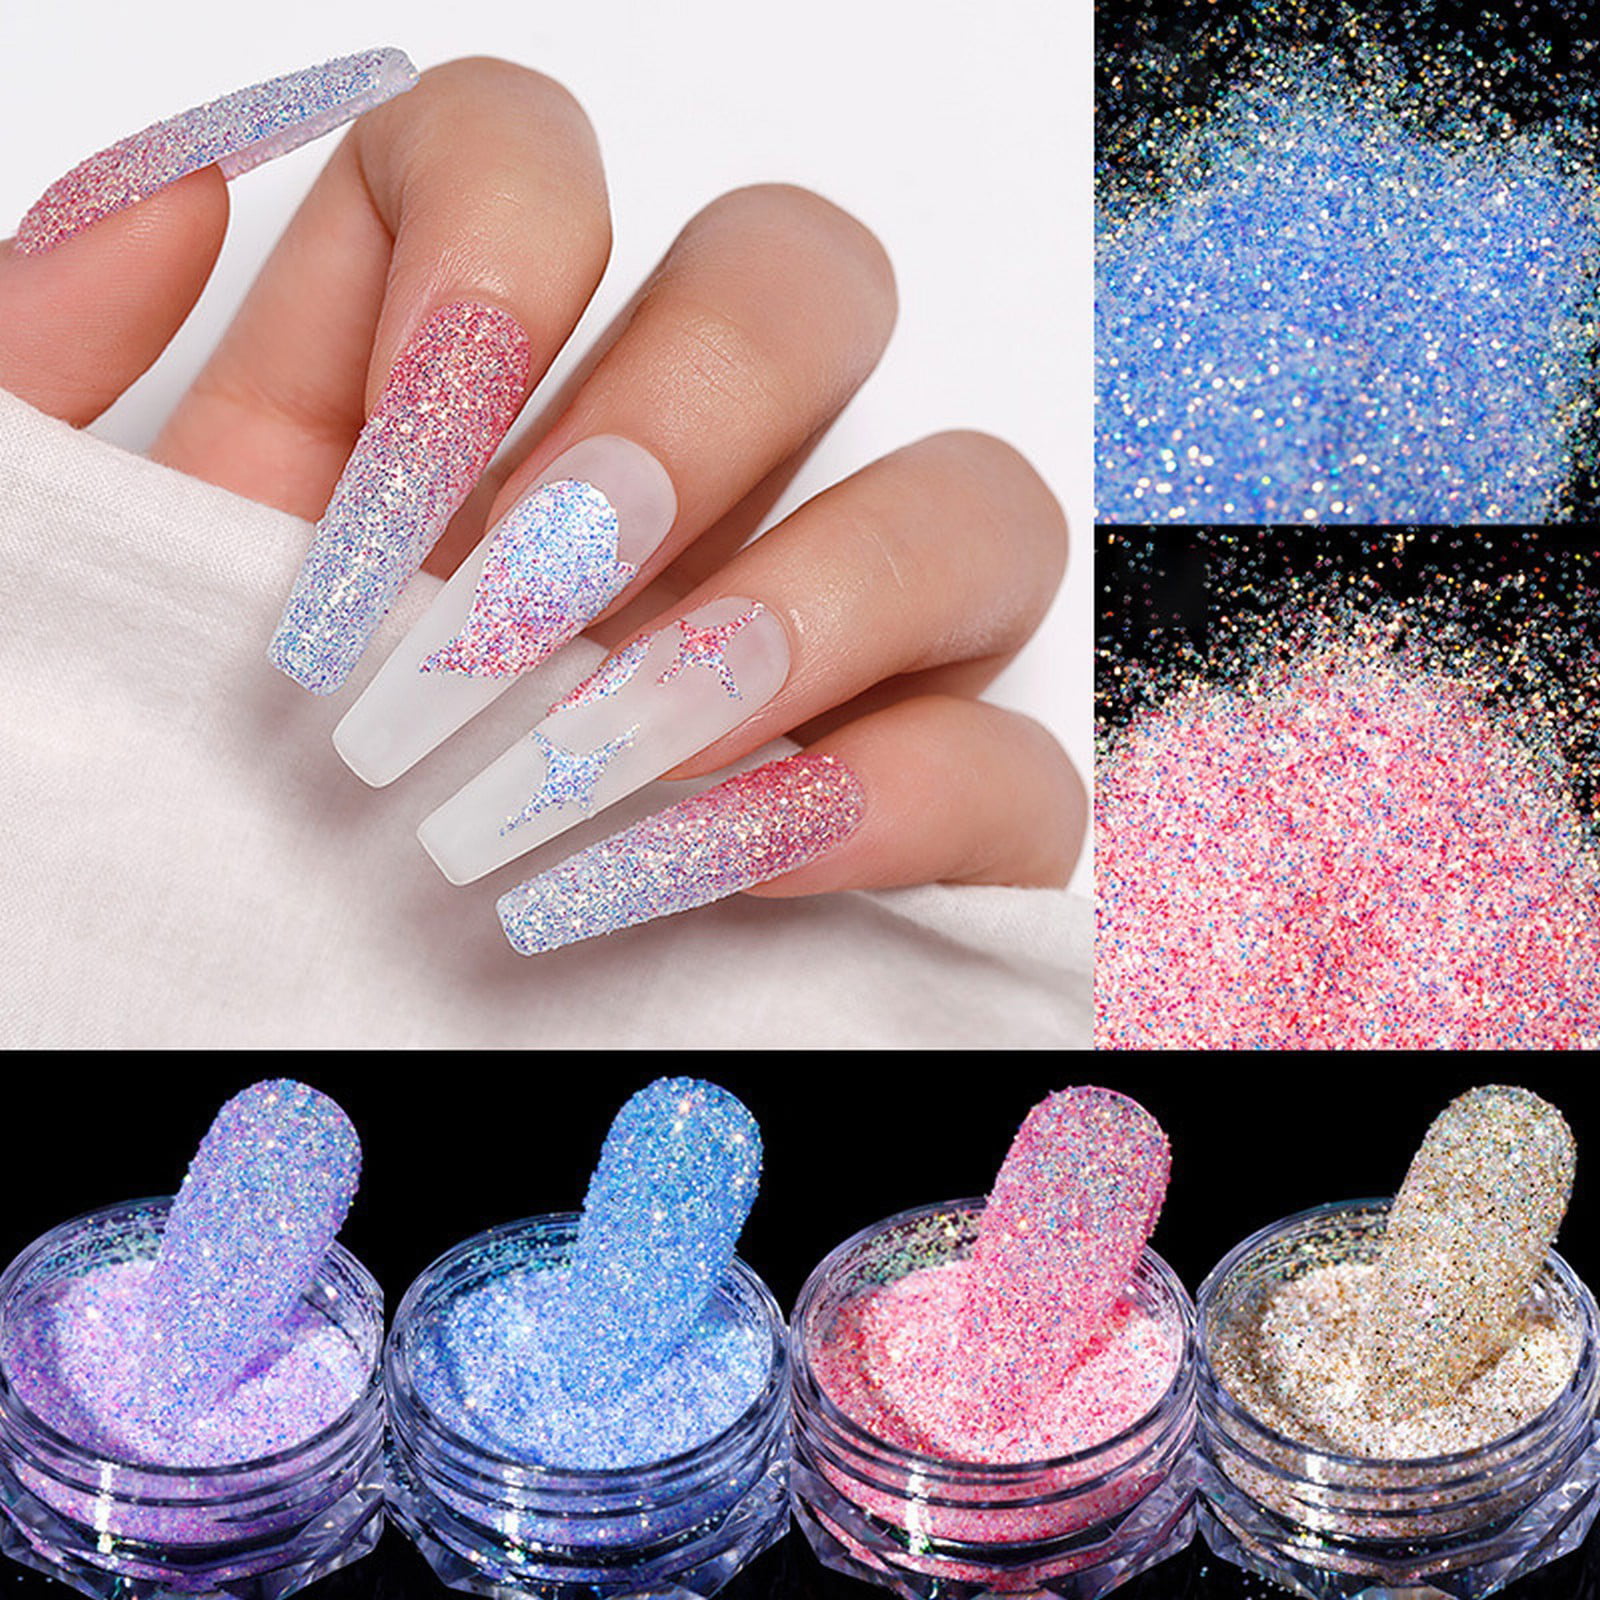 Outline French tips | Glitter french nails, Nail manicure, Fire nails